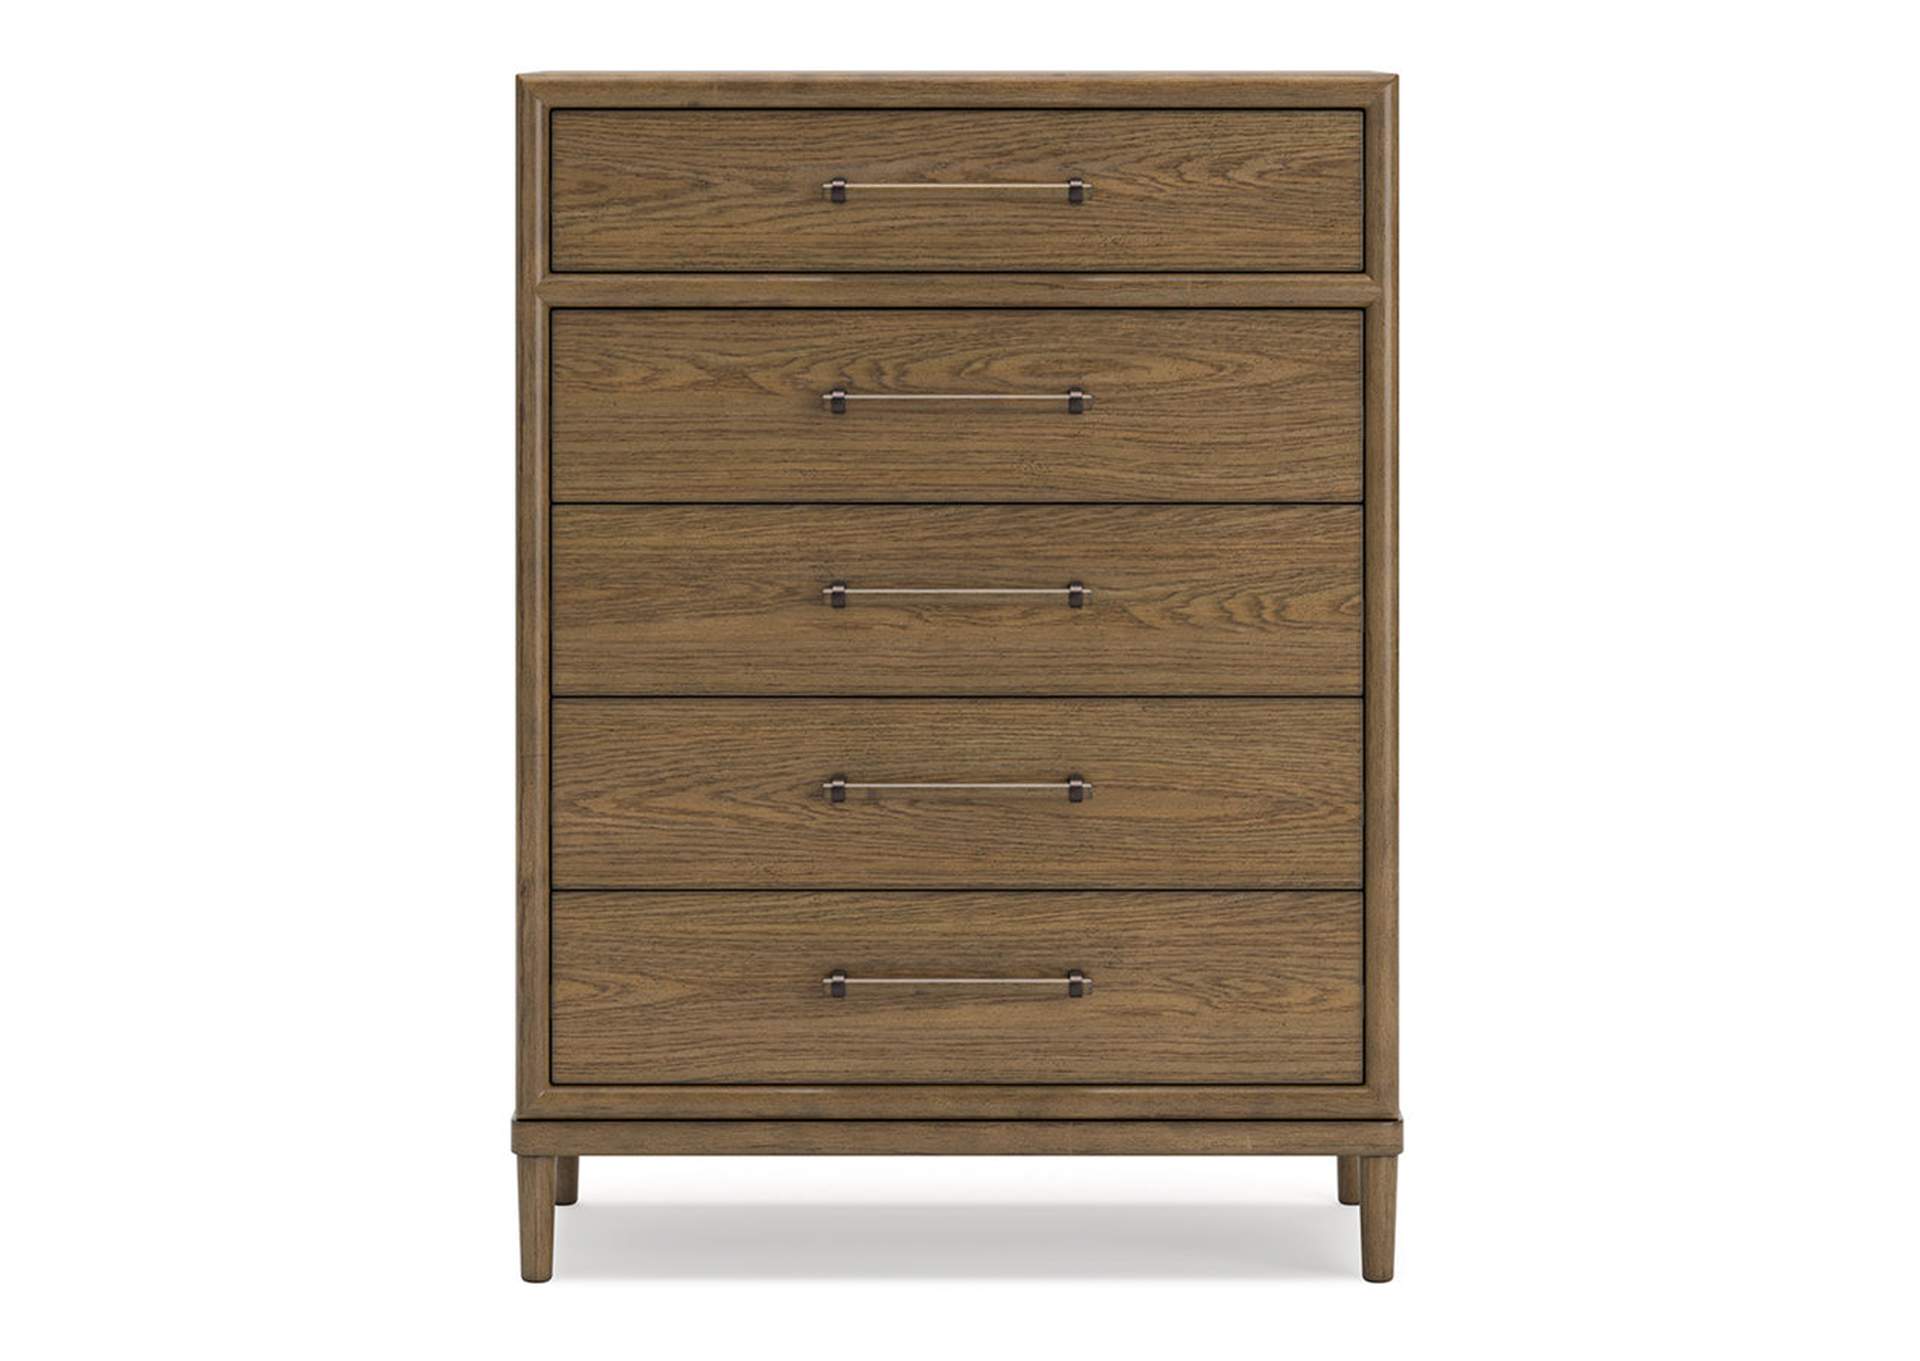 Roanhowe Chest of Drawers,Ashley